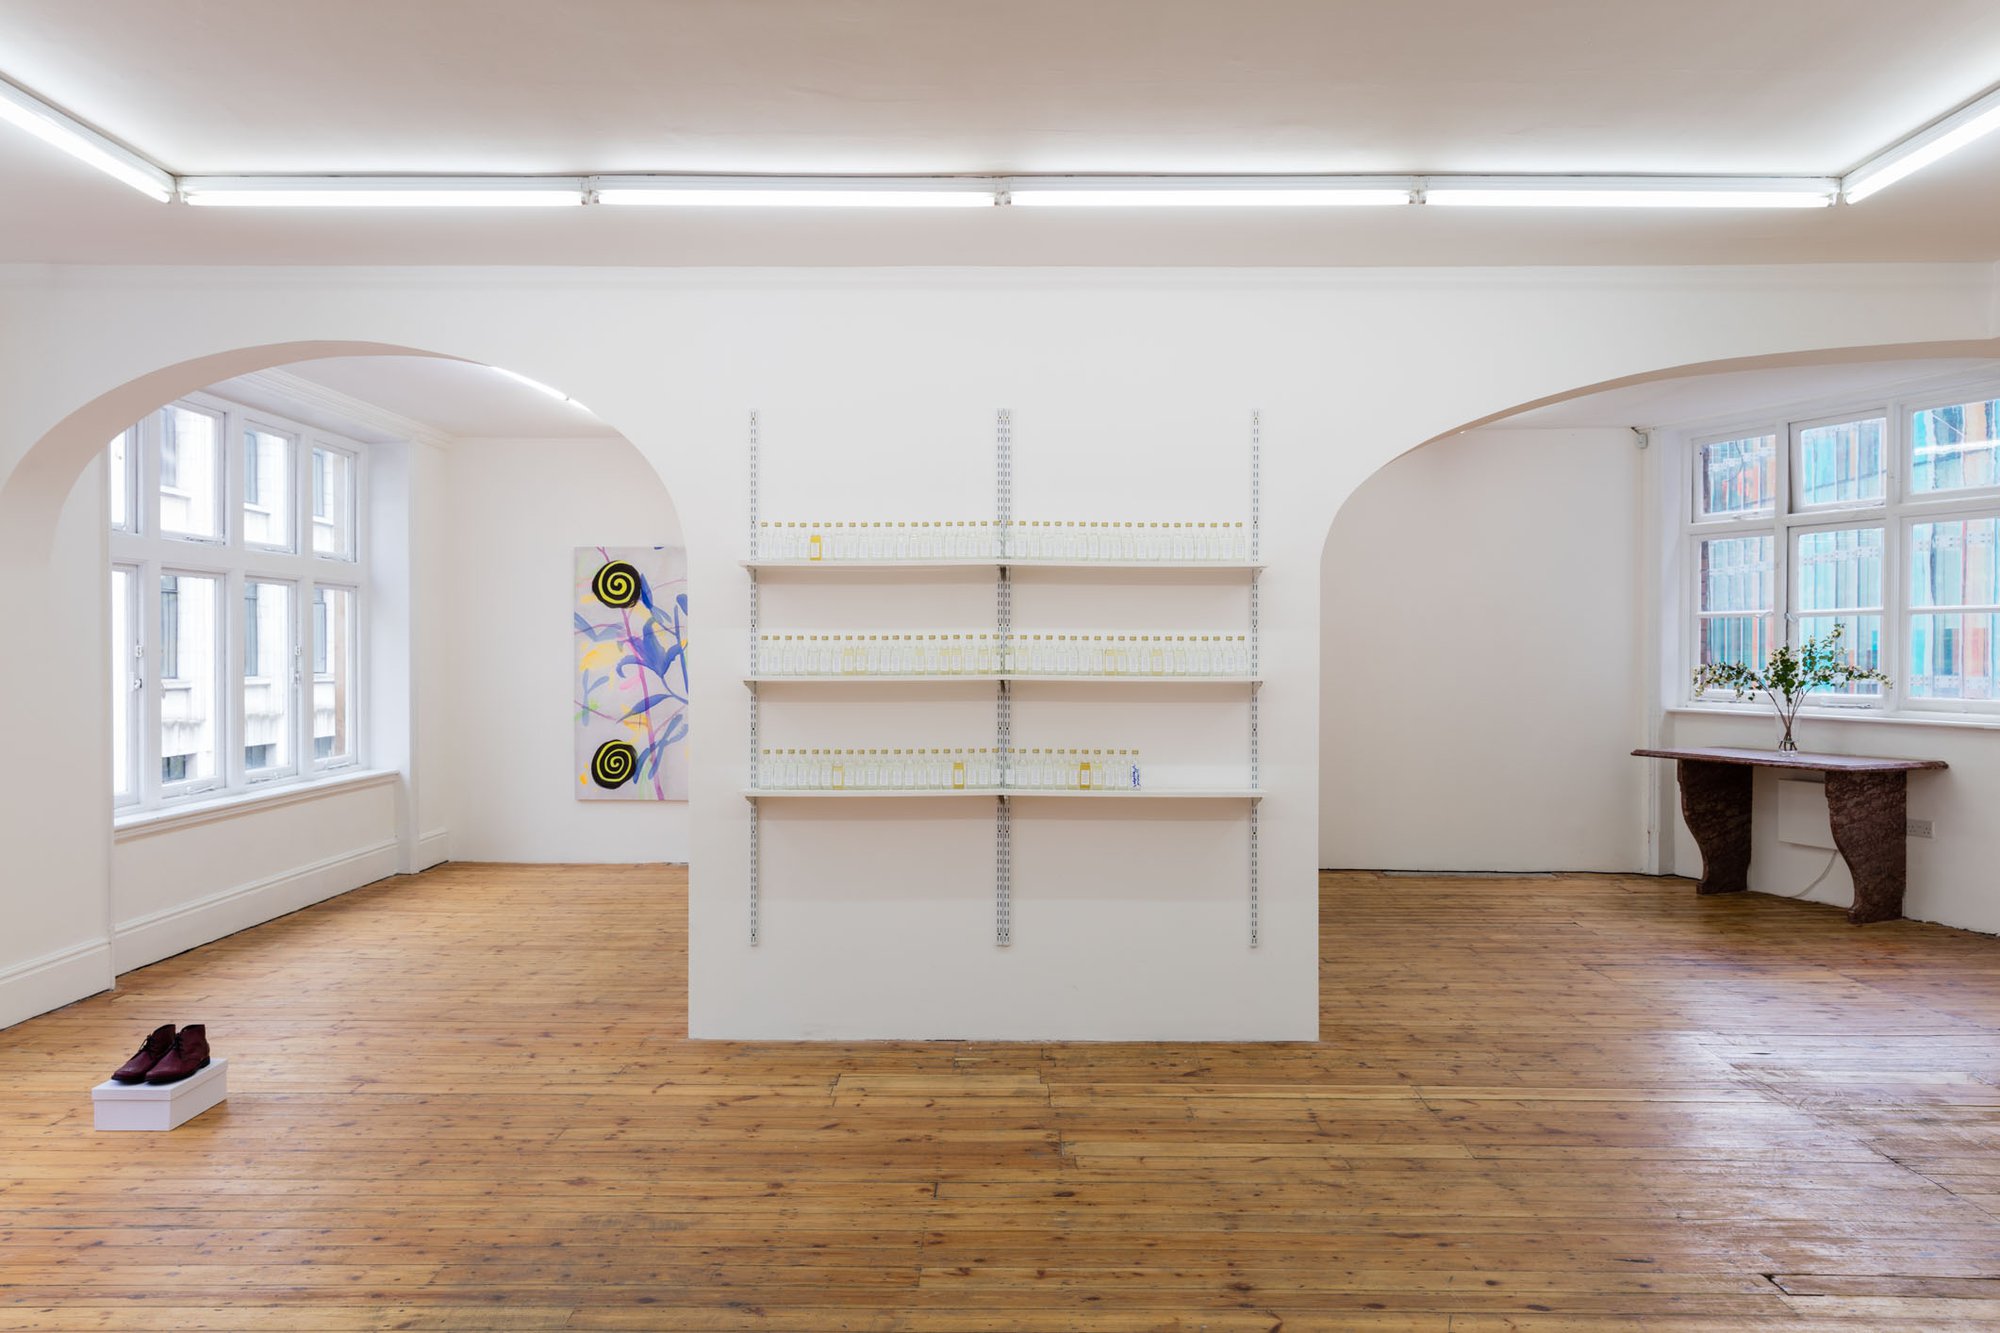 Installation view, Survival Is Not Enough, Rodeo, London, 2015